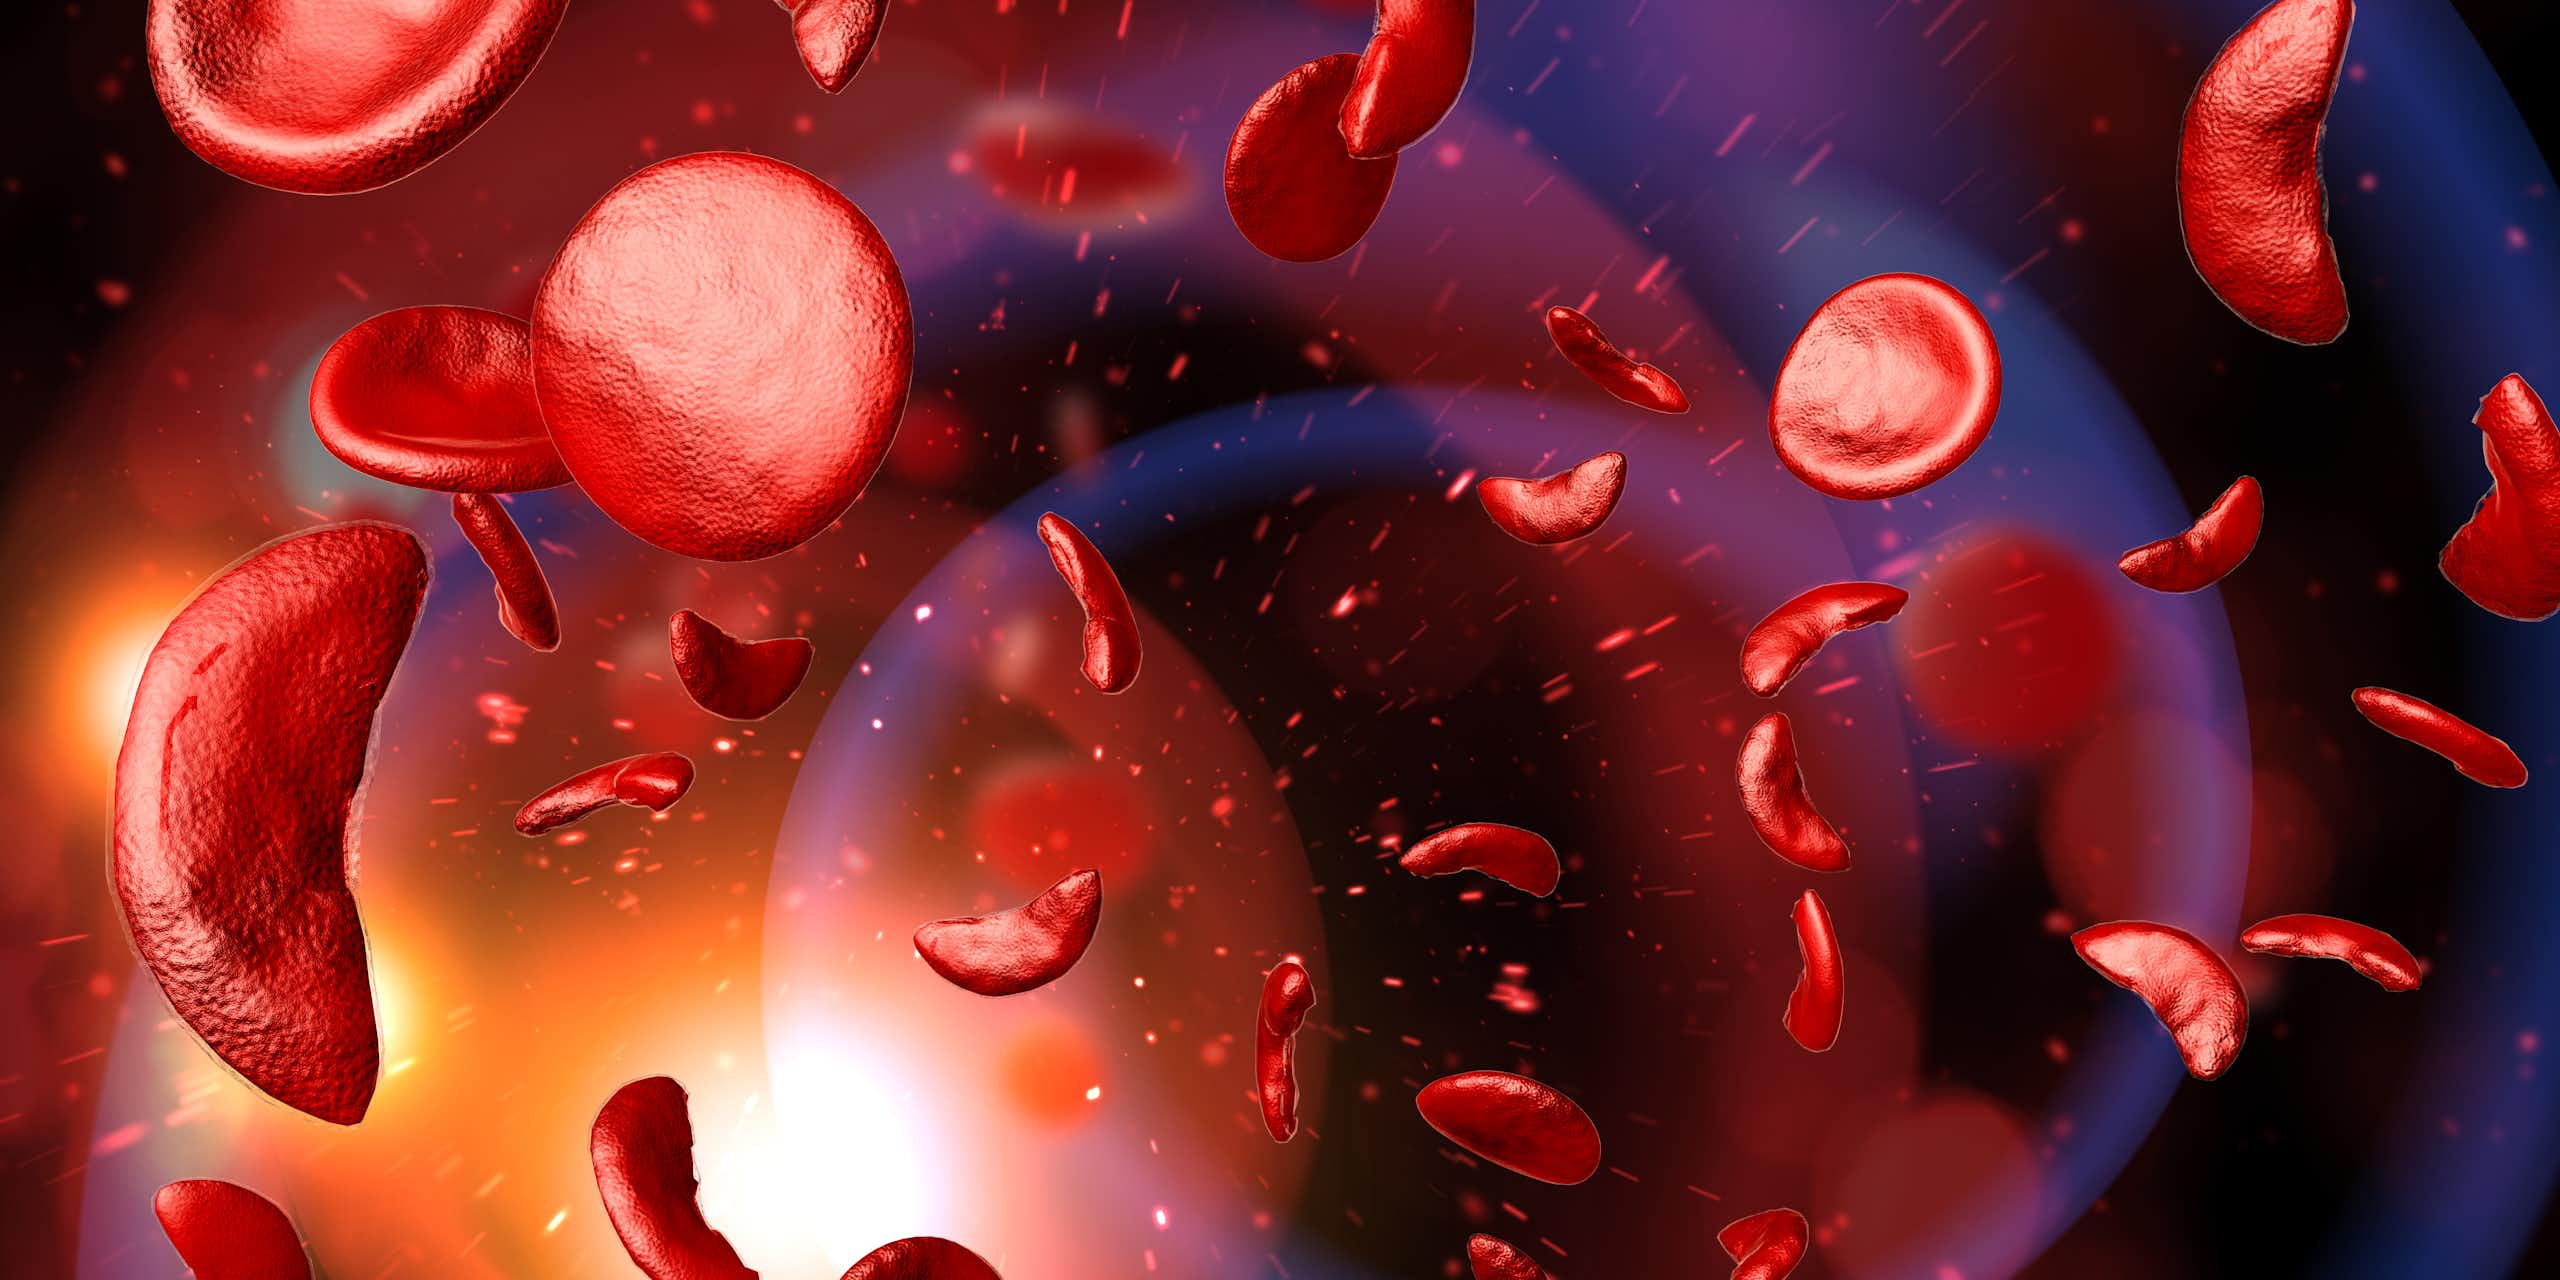 A digital drawing depicting the sickle shape red blood cells have in people with sickle cell disease.